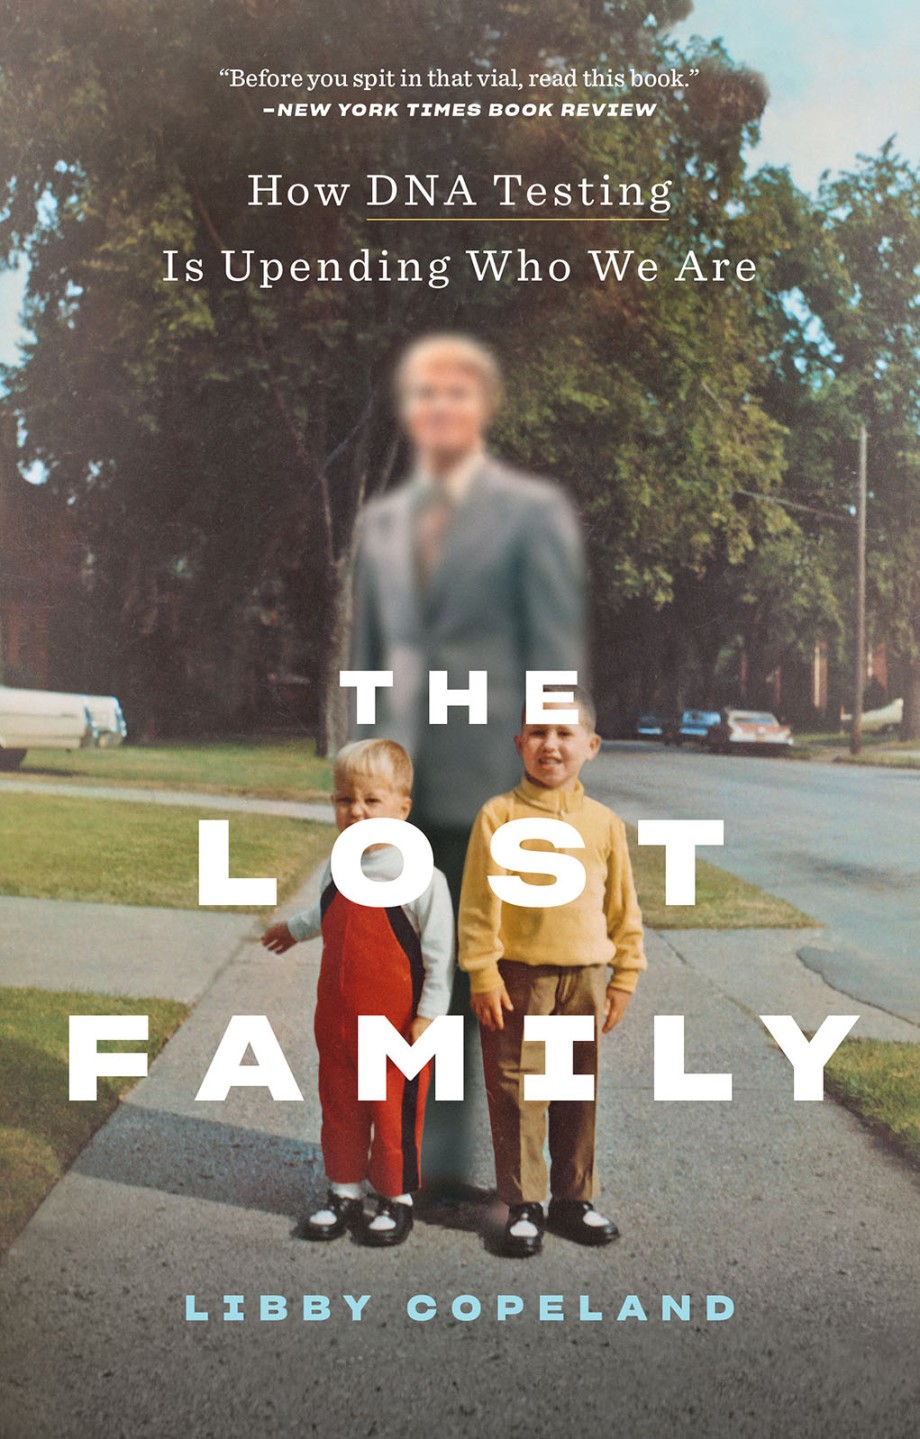 Lost family 20